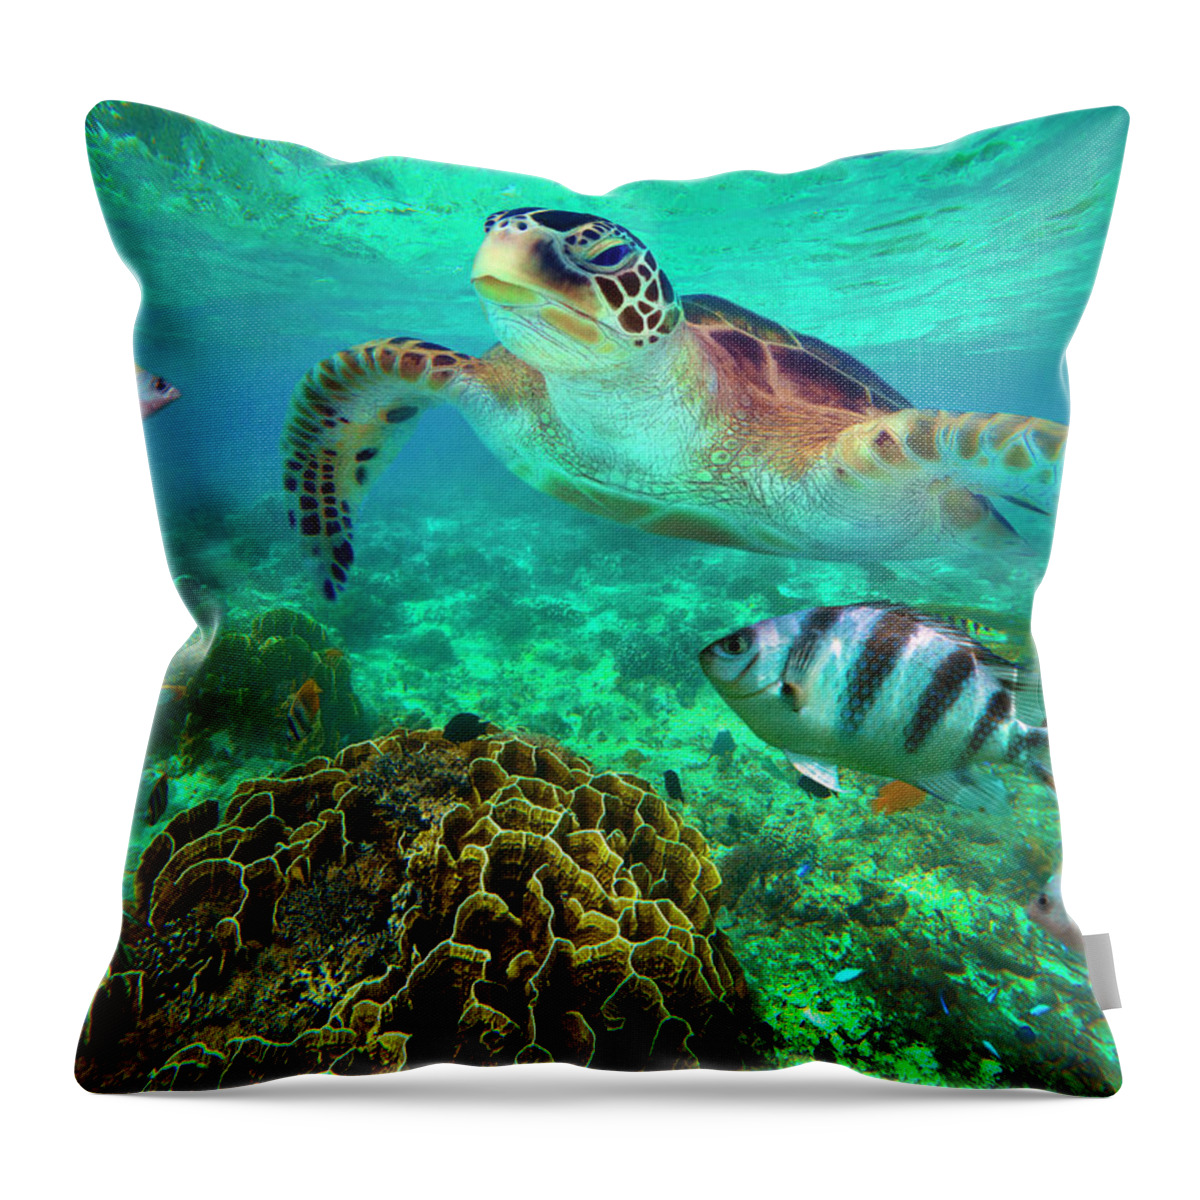 00586422 Throw Pillow featuring the photograph Green Sea Turtle And Sergeant Major Damselfish Group, Negros Oriental, Philippines by Tim Fitzharris